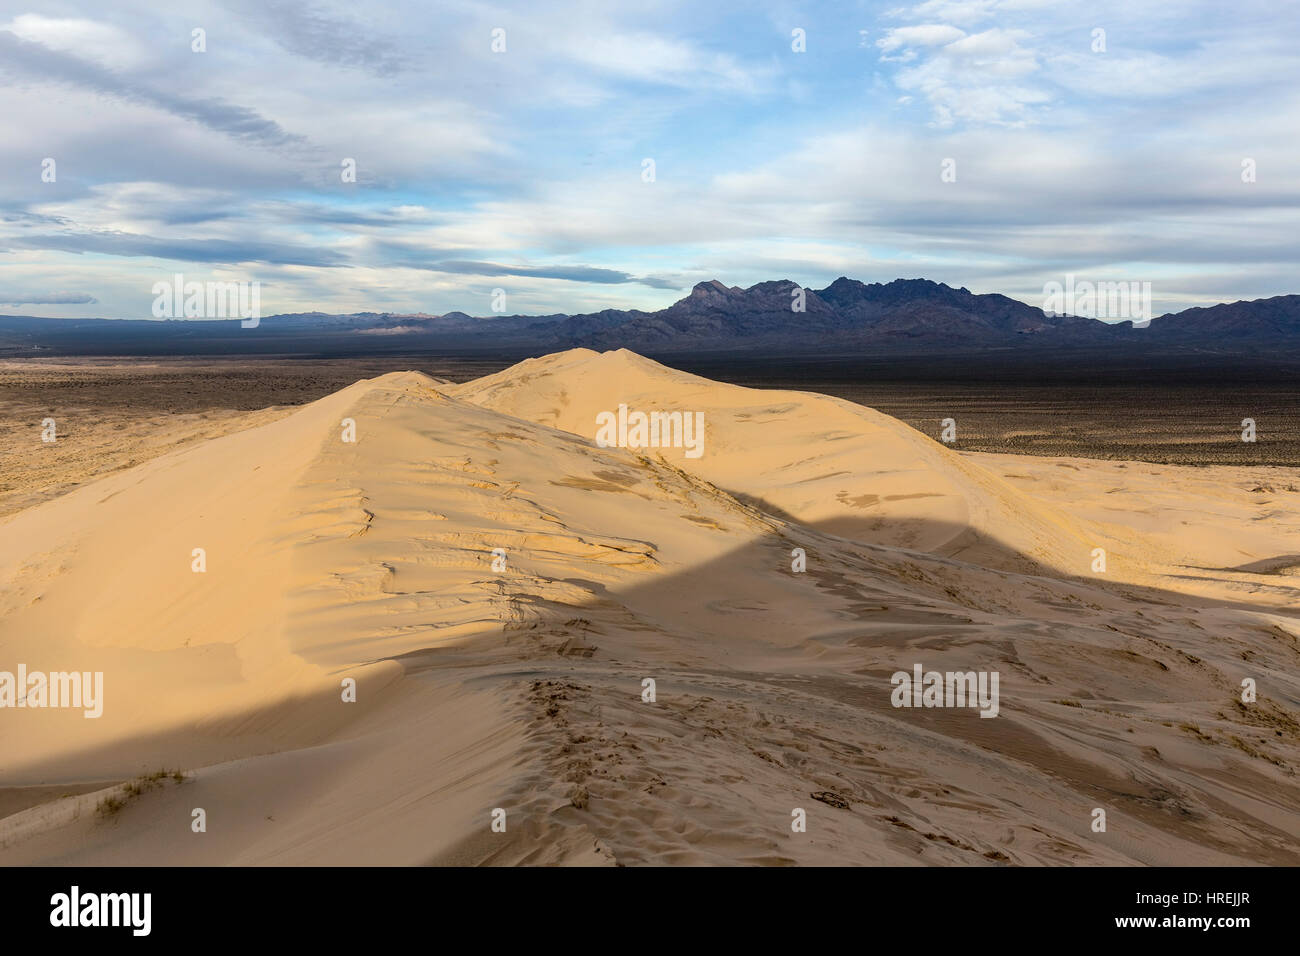 View from top of Kelso Sand Dunes wilderness area at the Mojave National Preserve in Southern California. Stock Photo